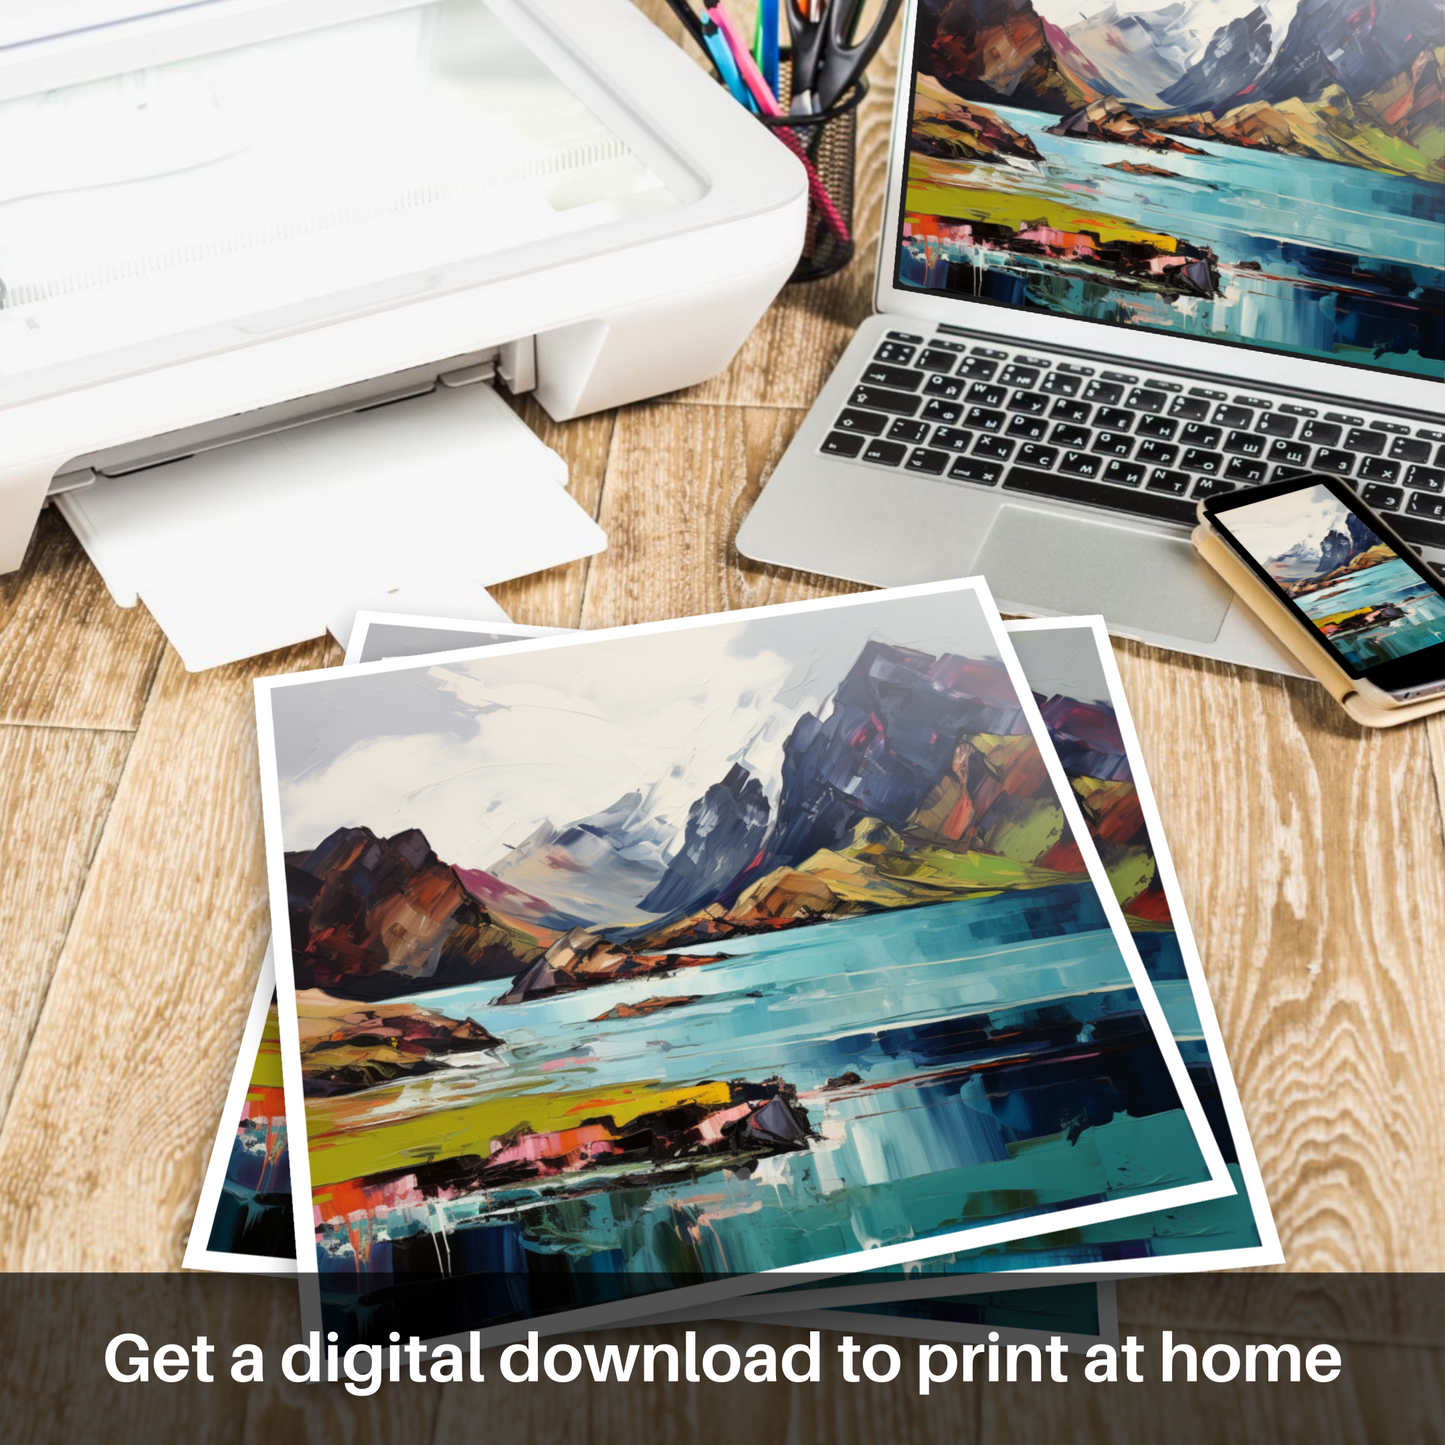 Downloadable and printable picture of Loch Coruisk, Isle of Skye